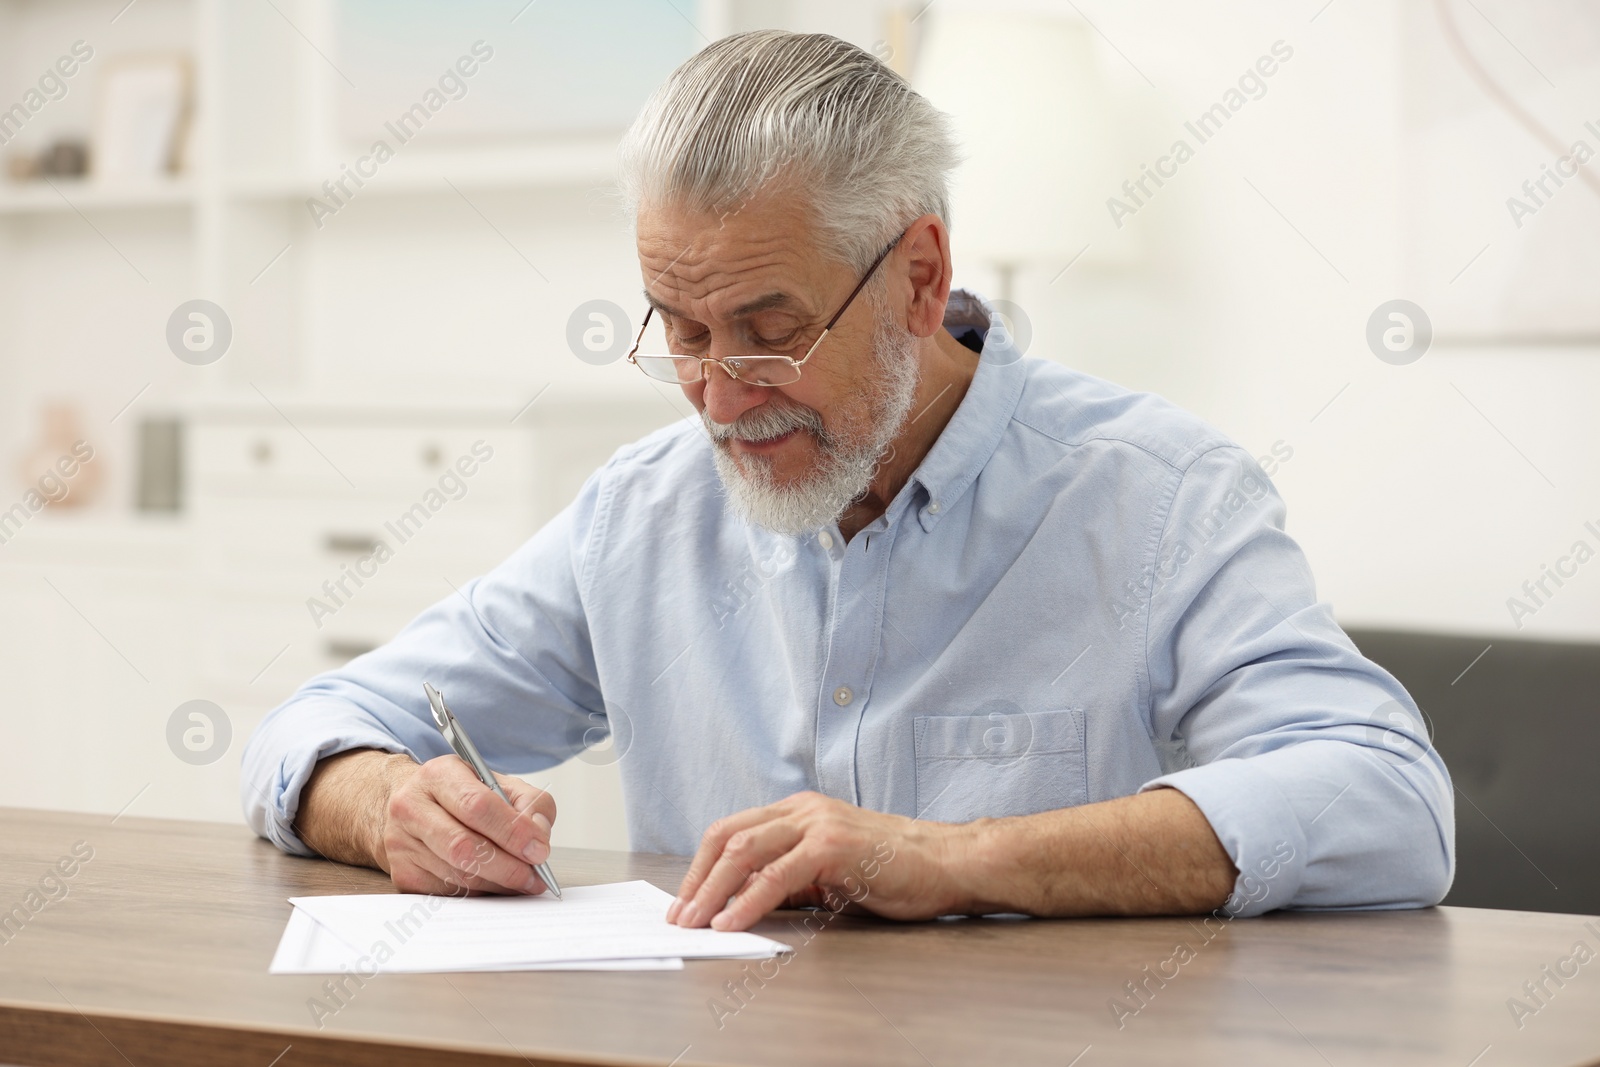 Photo of Senior man signing Last Will and Testament at wooden table indoors